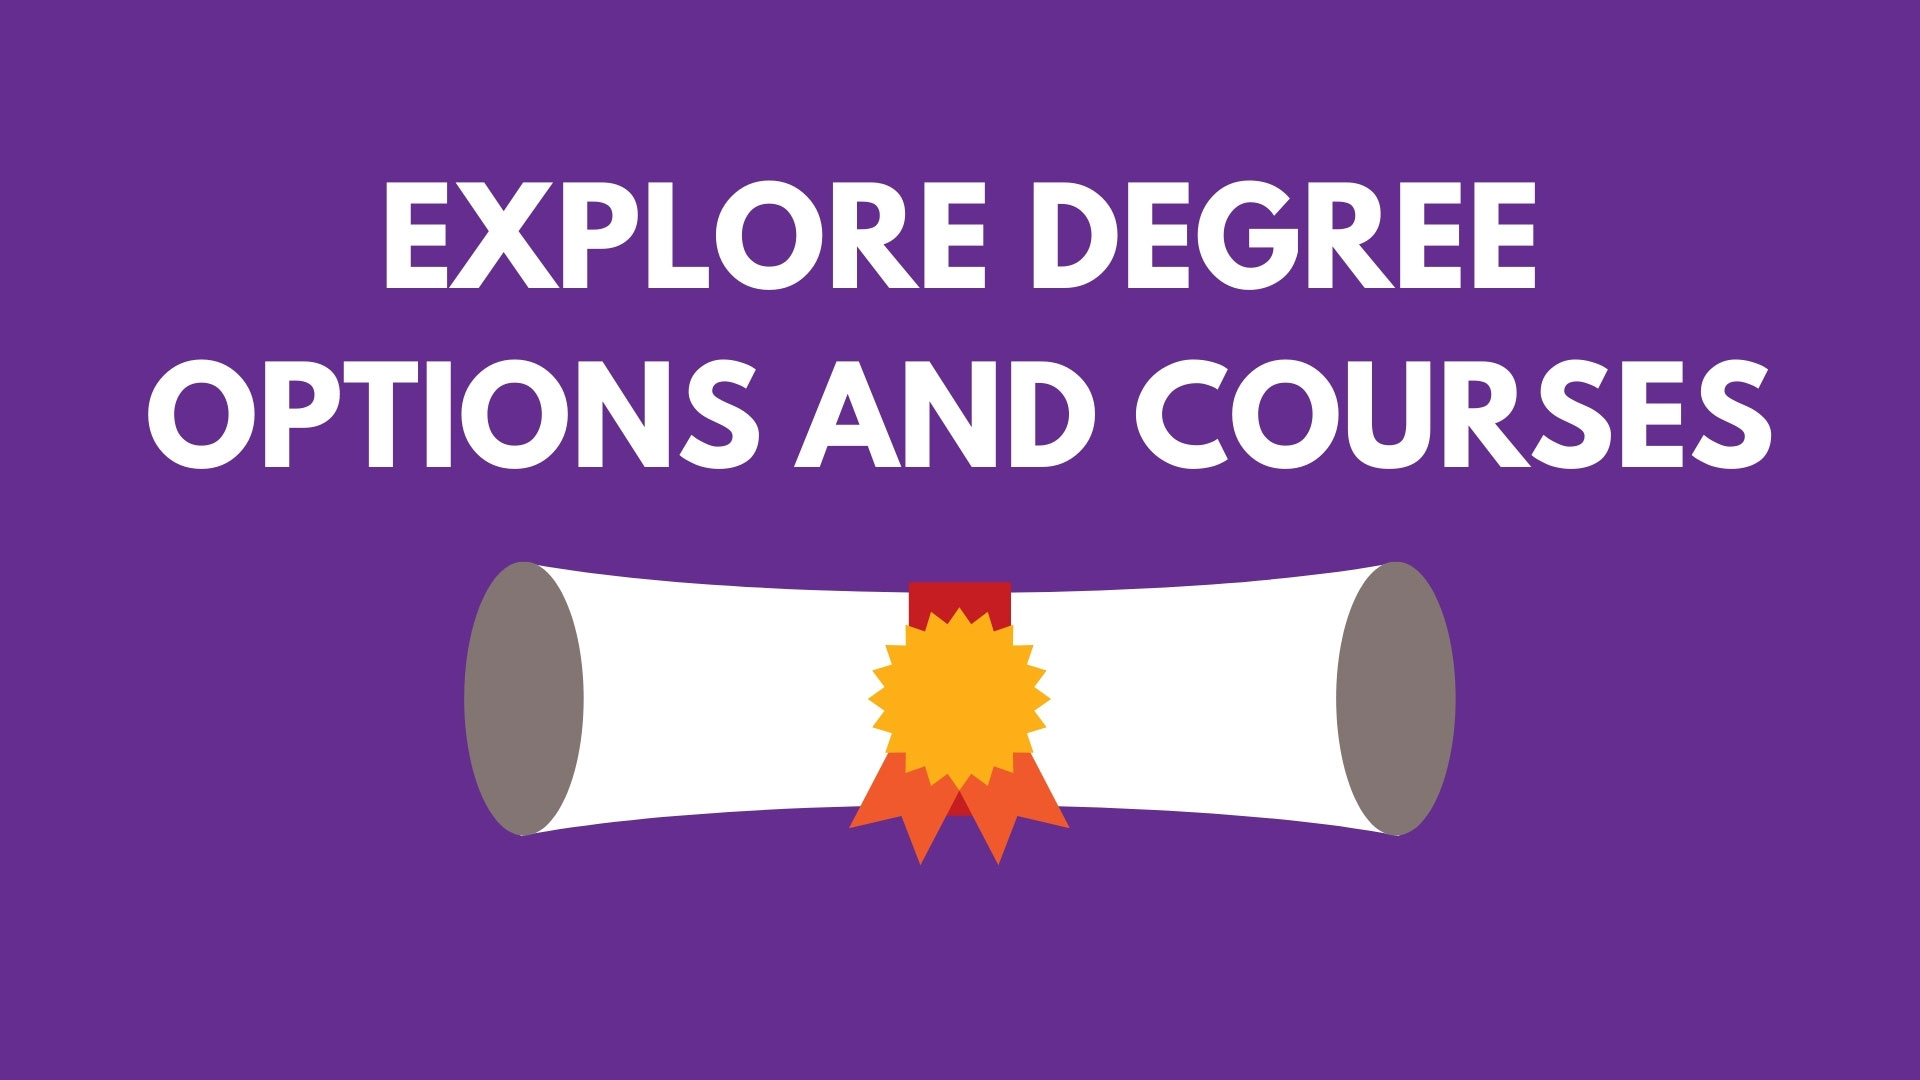 Explore Degree Options and courses offered